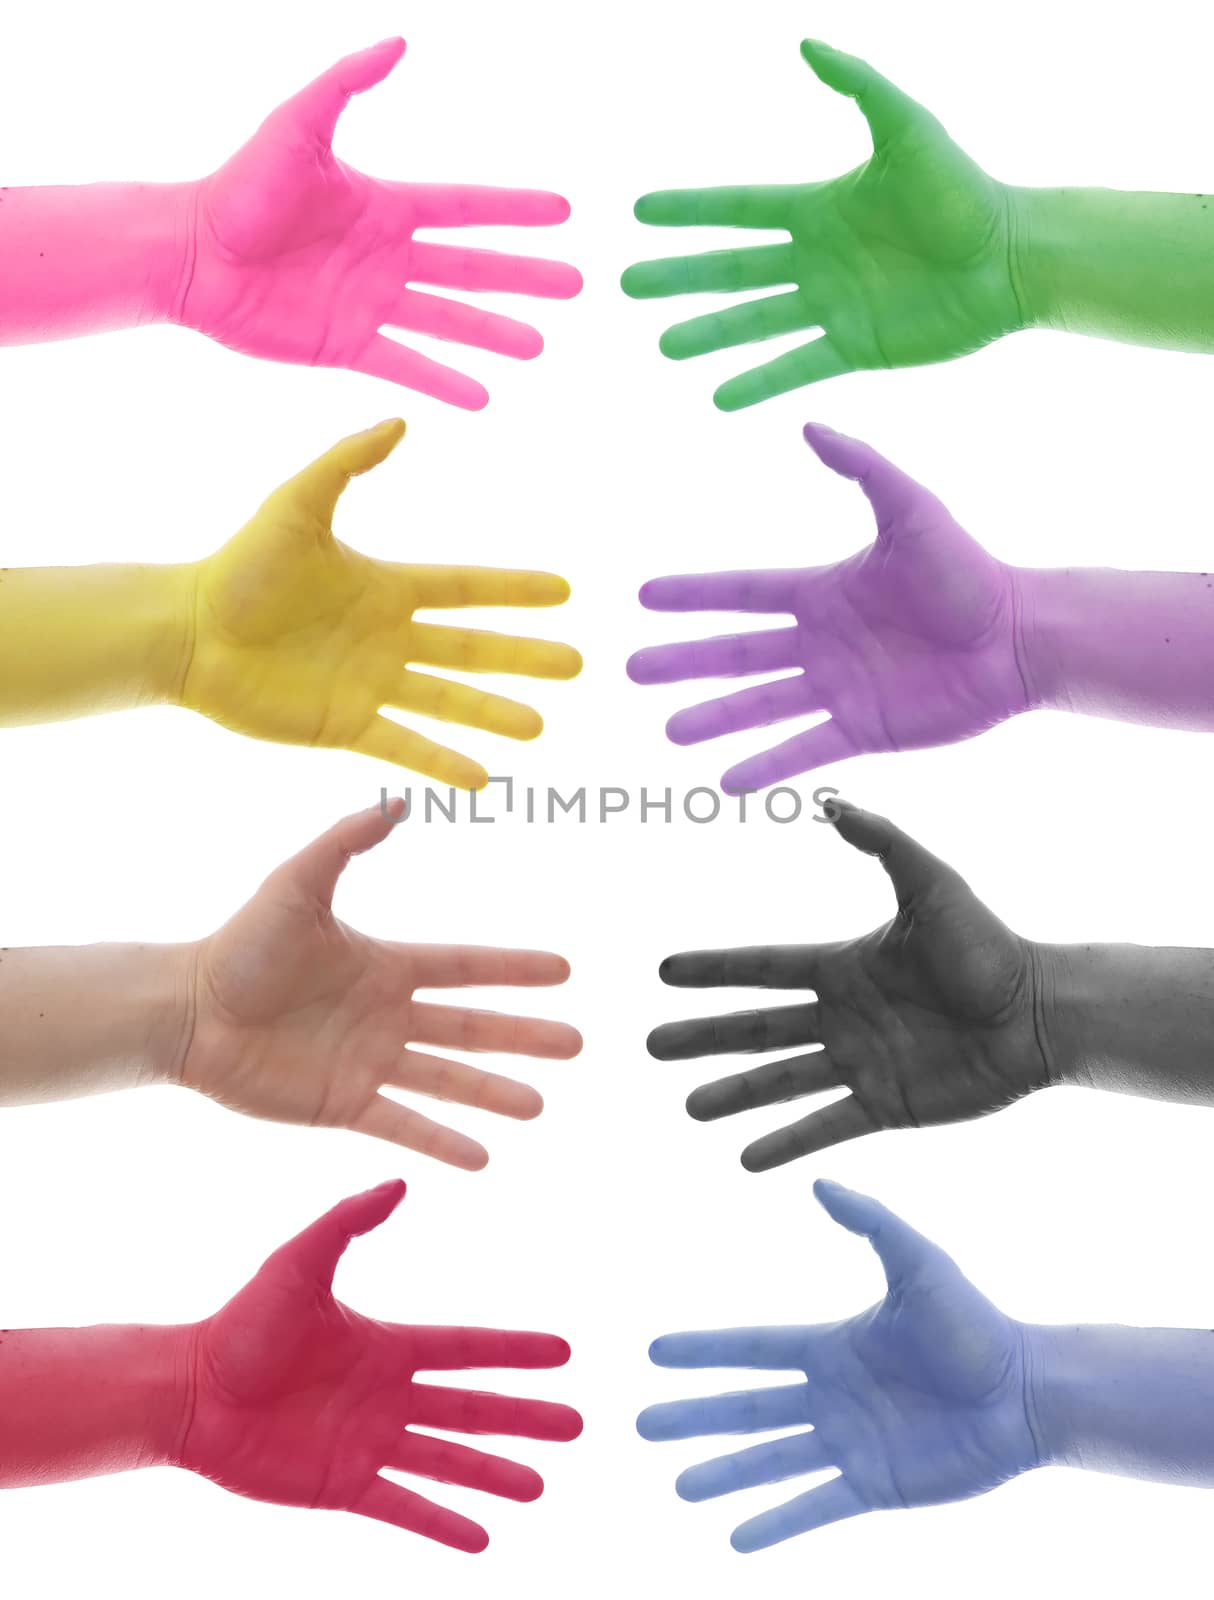 eight differrent colors hands on white background